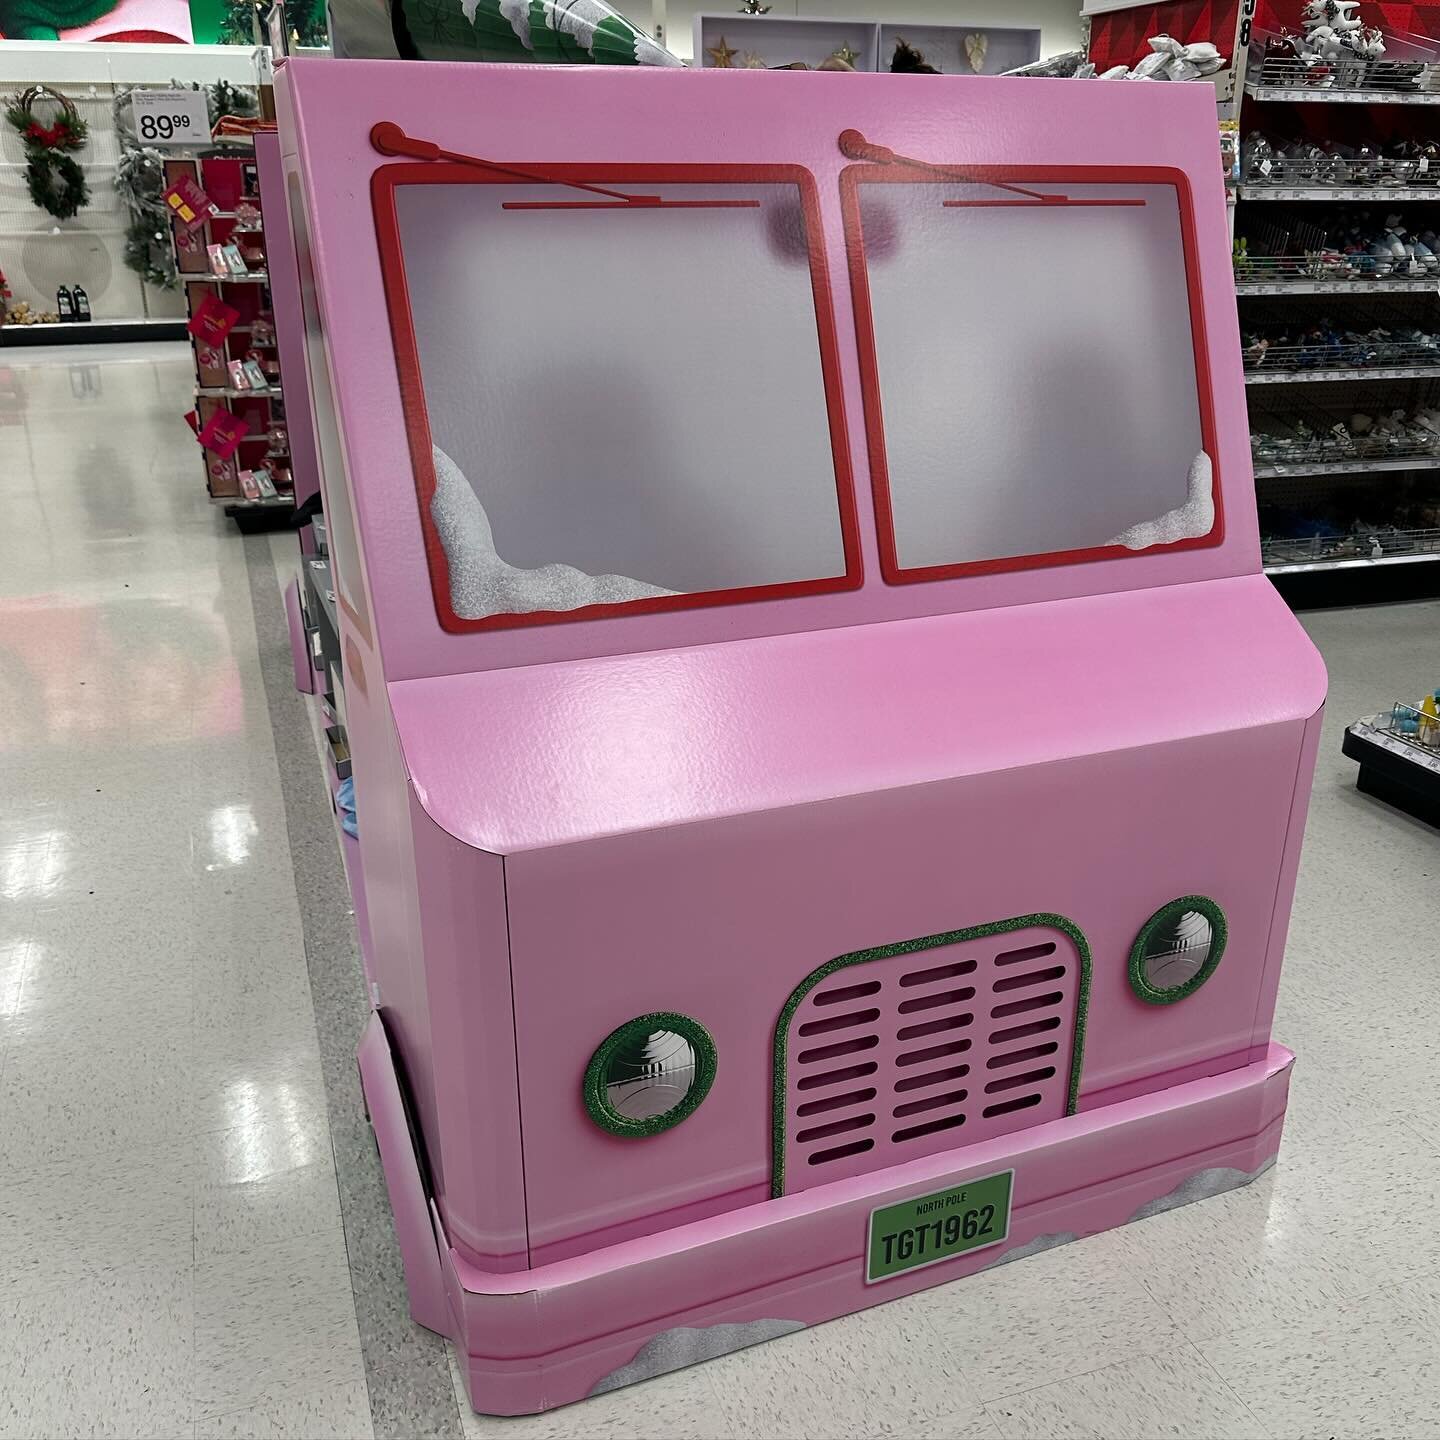 @target jumping on the #stepvan #bandwagon . Pretty cool!  I wonder if they&rsquo;ll give to us when they&rsquo;re done with it🤔

#vanlife #vanculture #vanlifestyle #p20 #chevy #p10 #classic #icecreamtruck #bigworm #djvan #djtruck #bagged #lowrider 